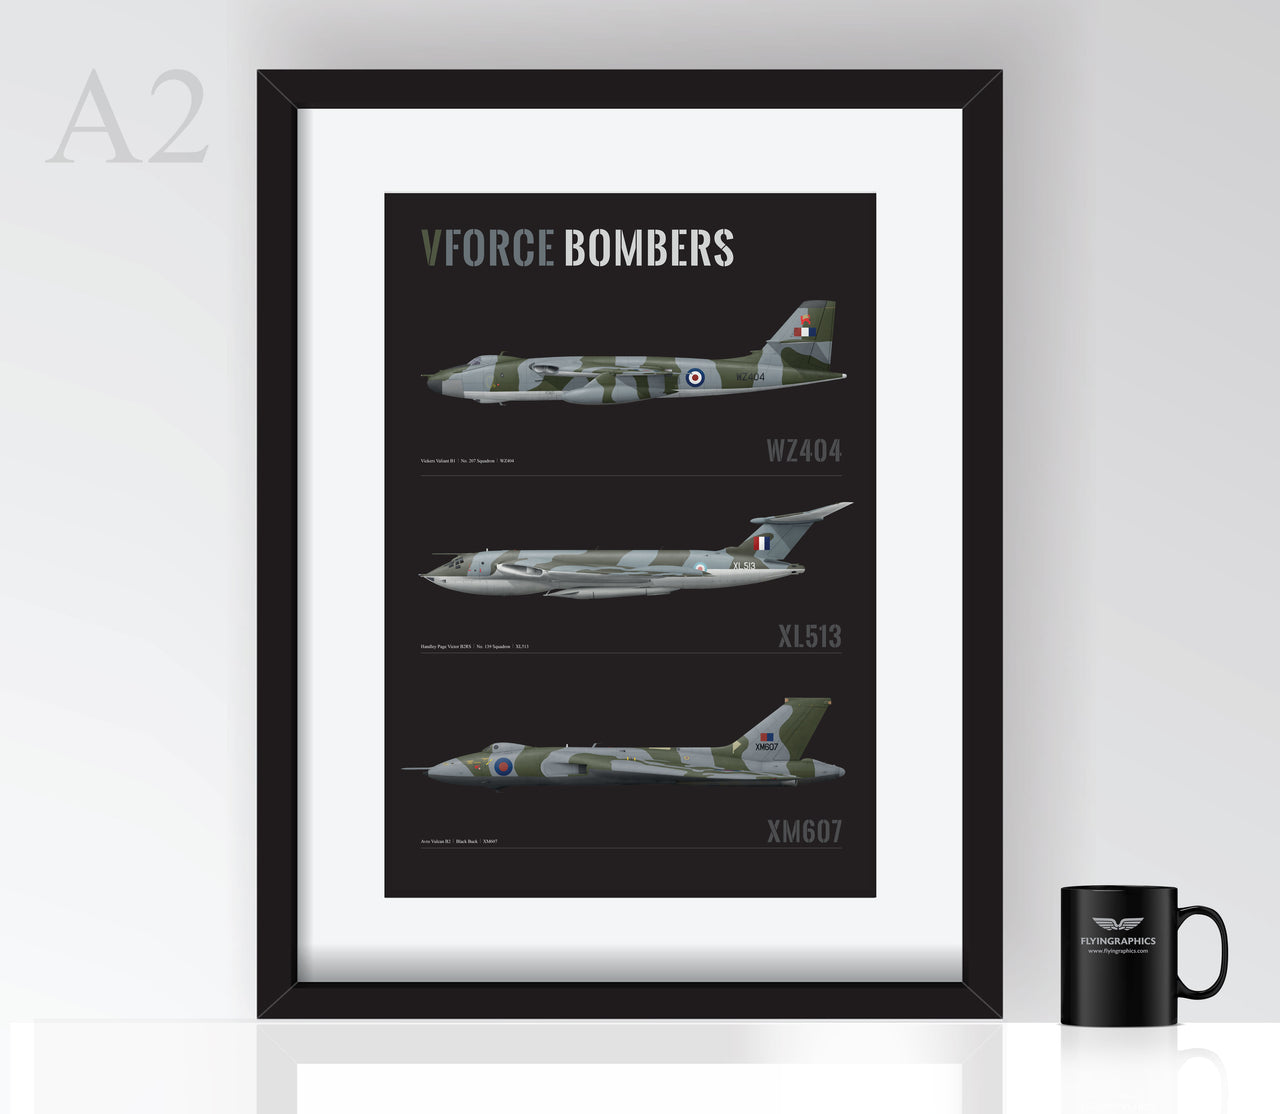 VForce Bombers - Poster